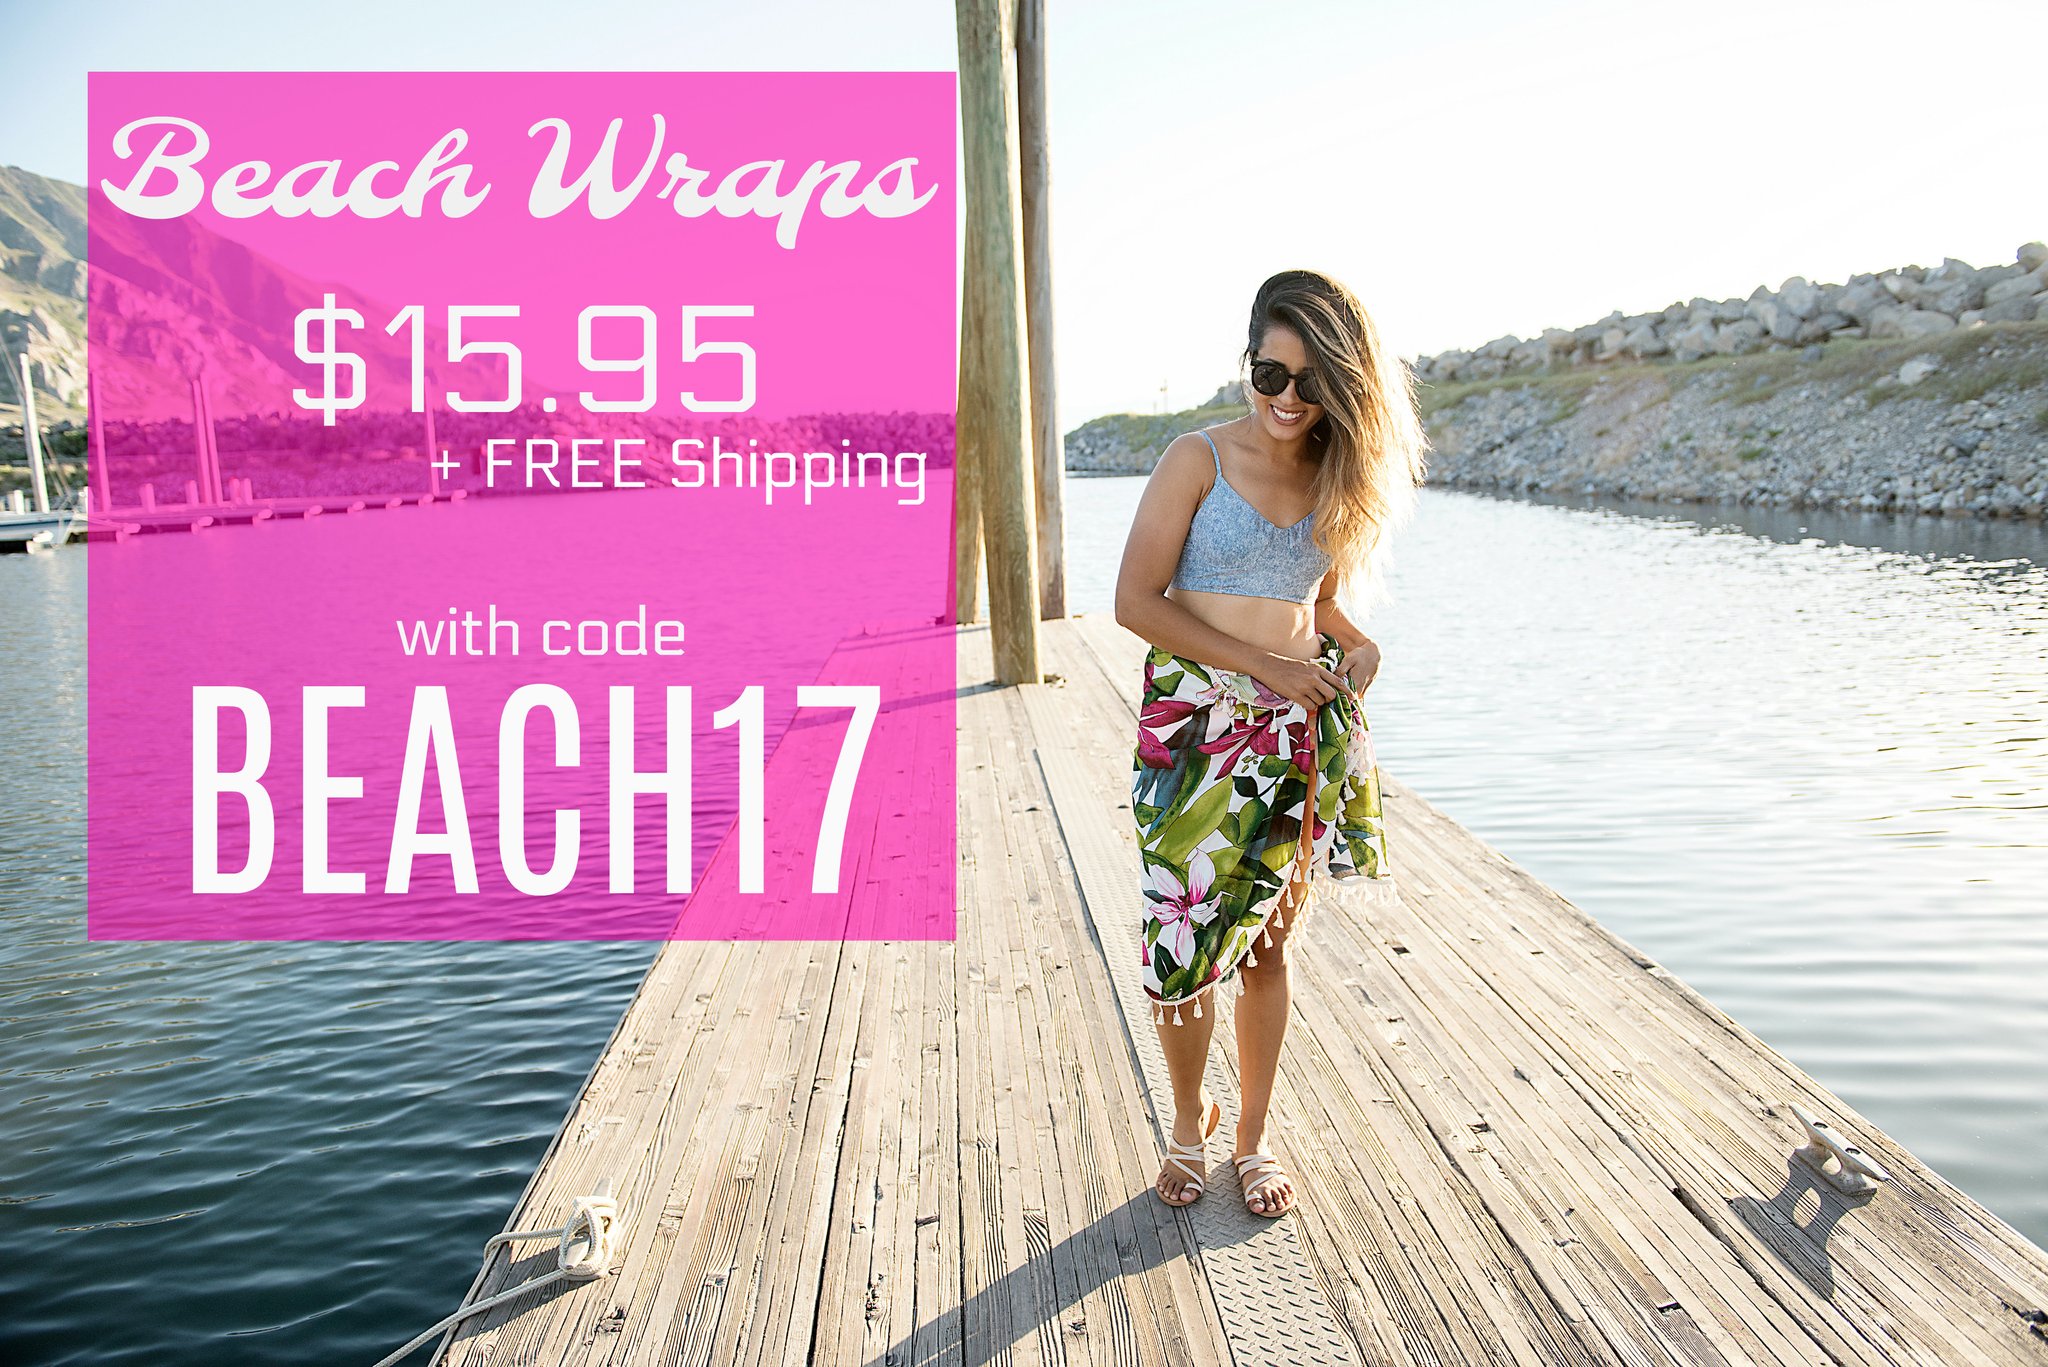 SO CUTE! Beach Wraps for just $15.95 + FREE SHIPPING!